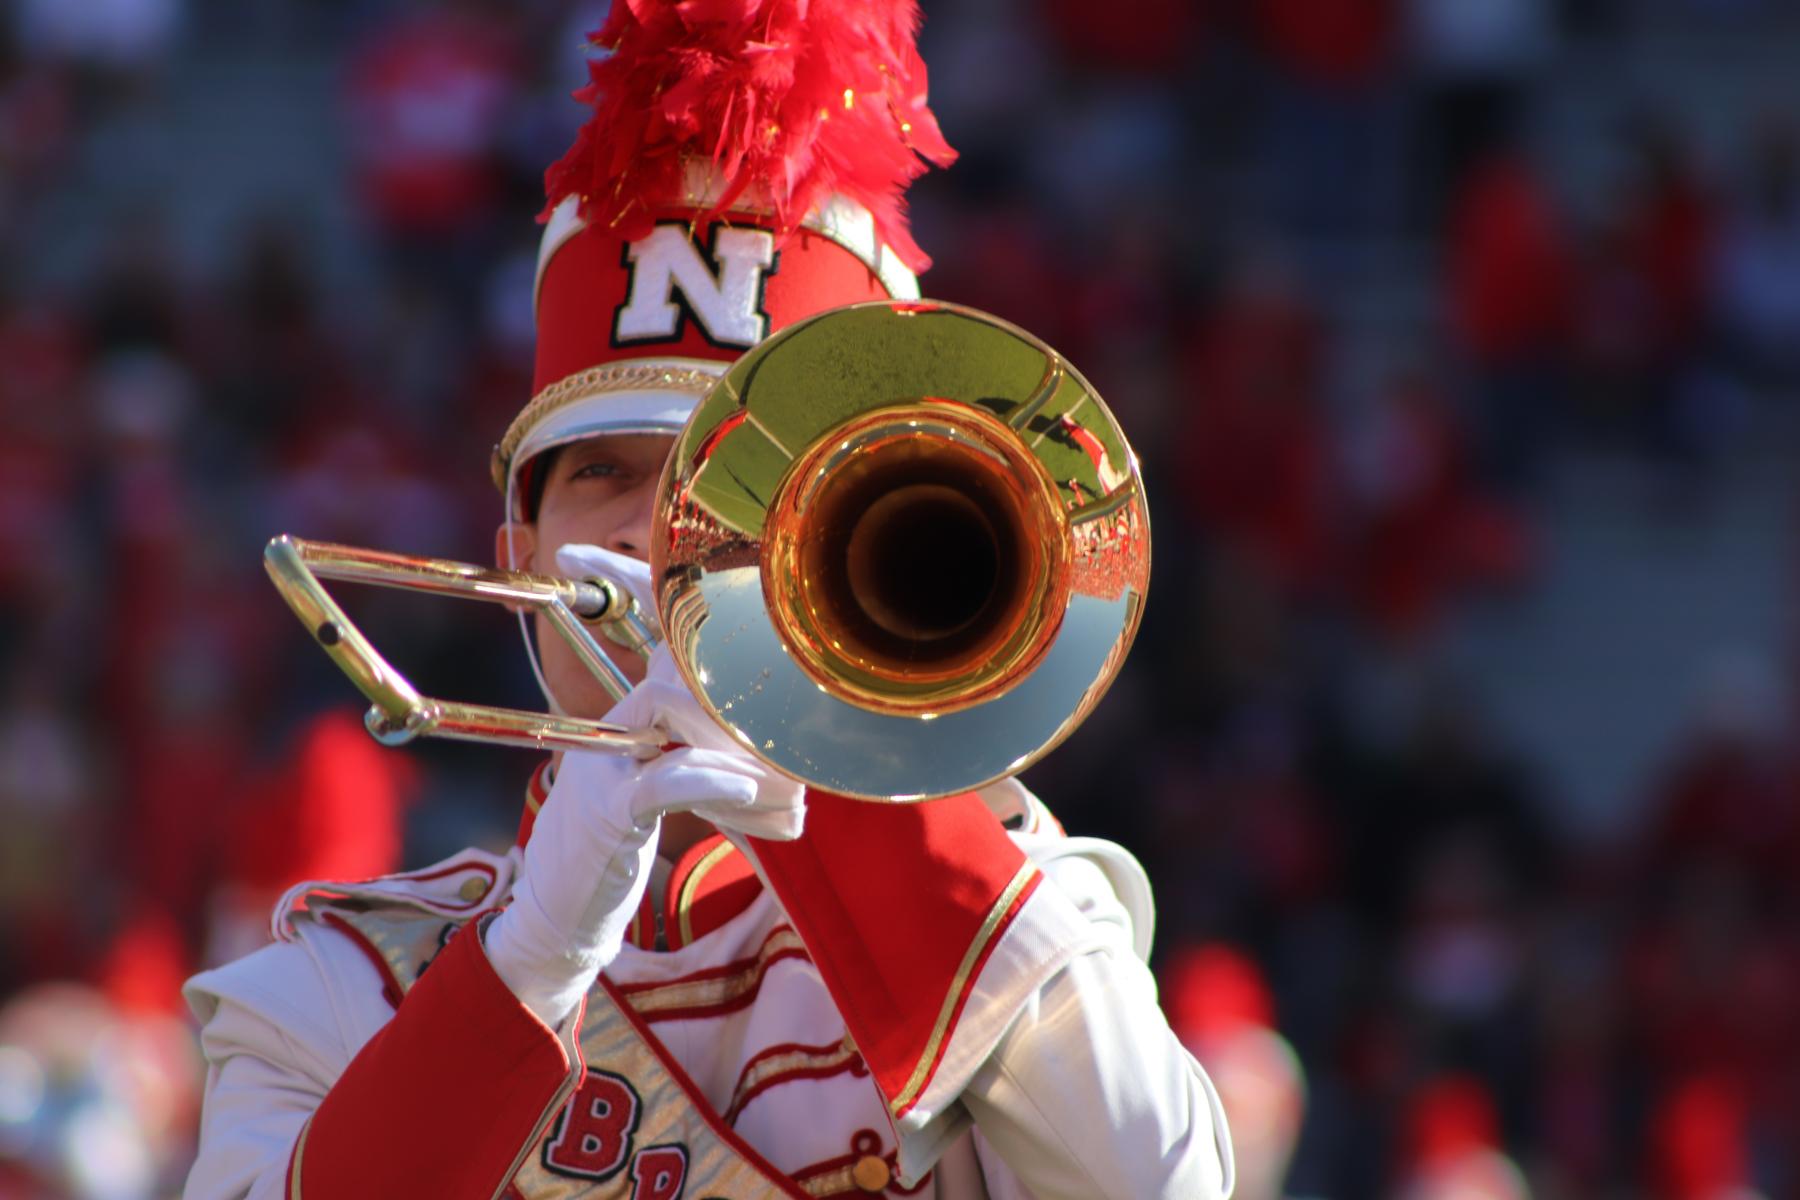 Photo of a Cornhusker Marching Band trombone player at Memorial Stadium.